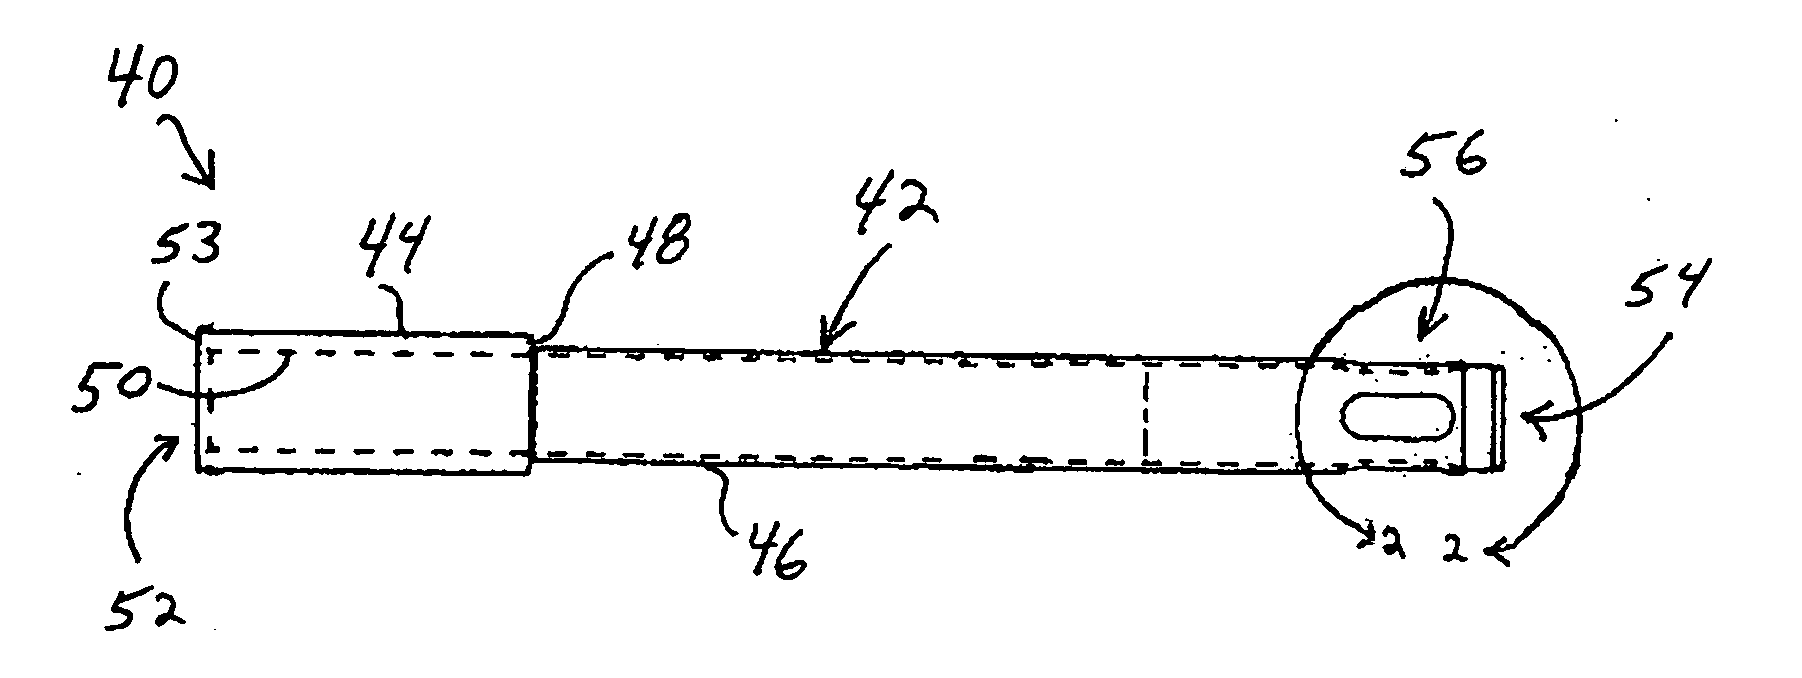 Articular cartilage repair implant delivery device and method of use